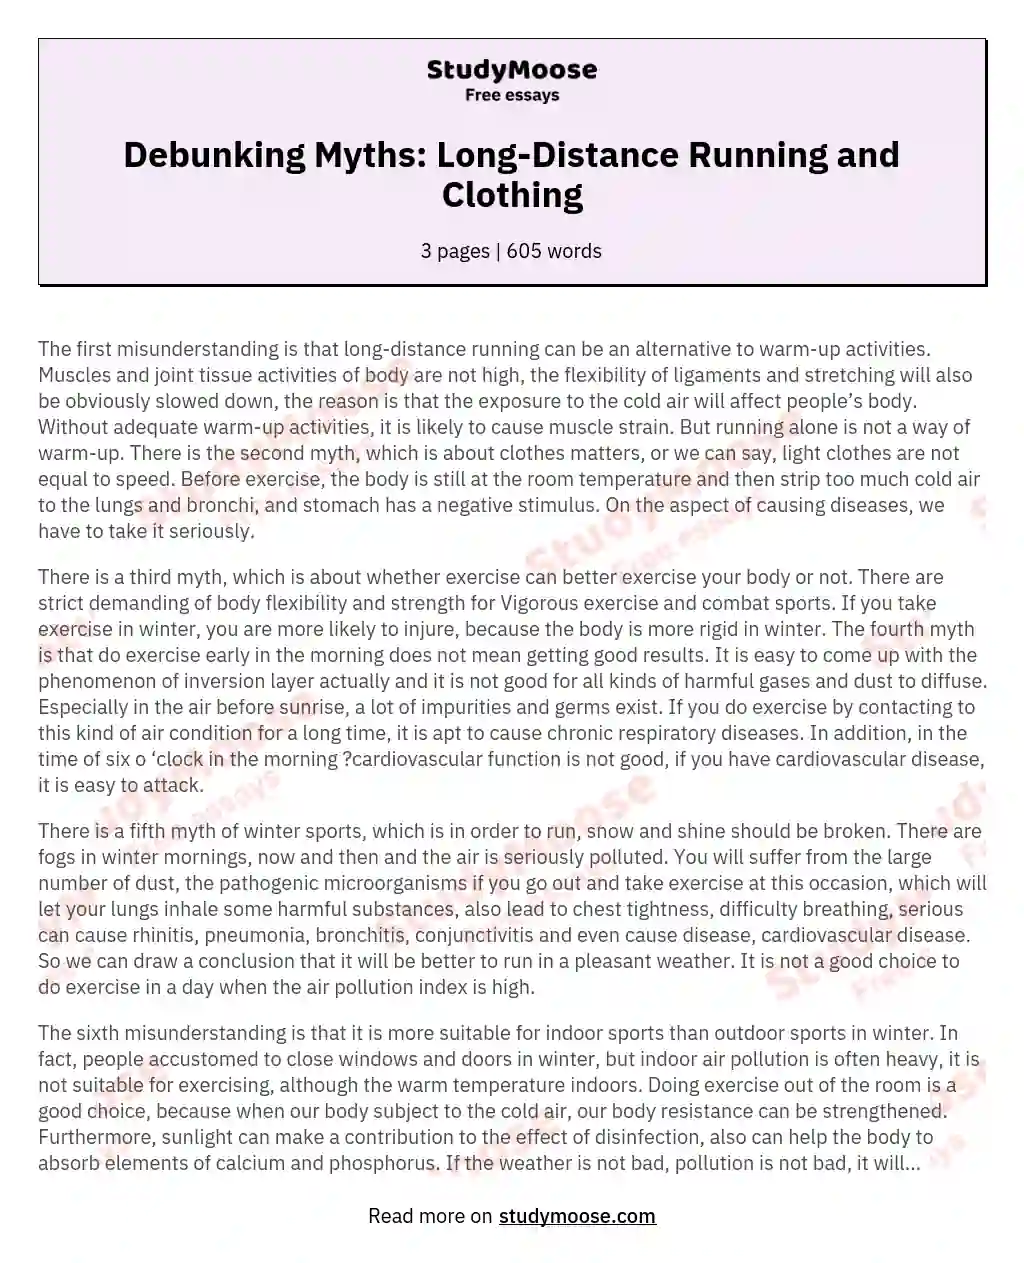 Debunking Myths: Long-Distance Running and Clothing essay